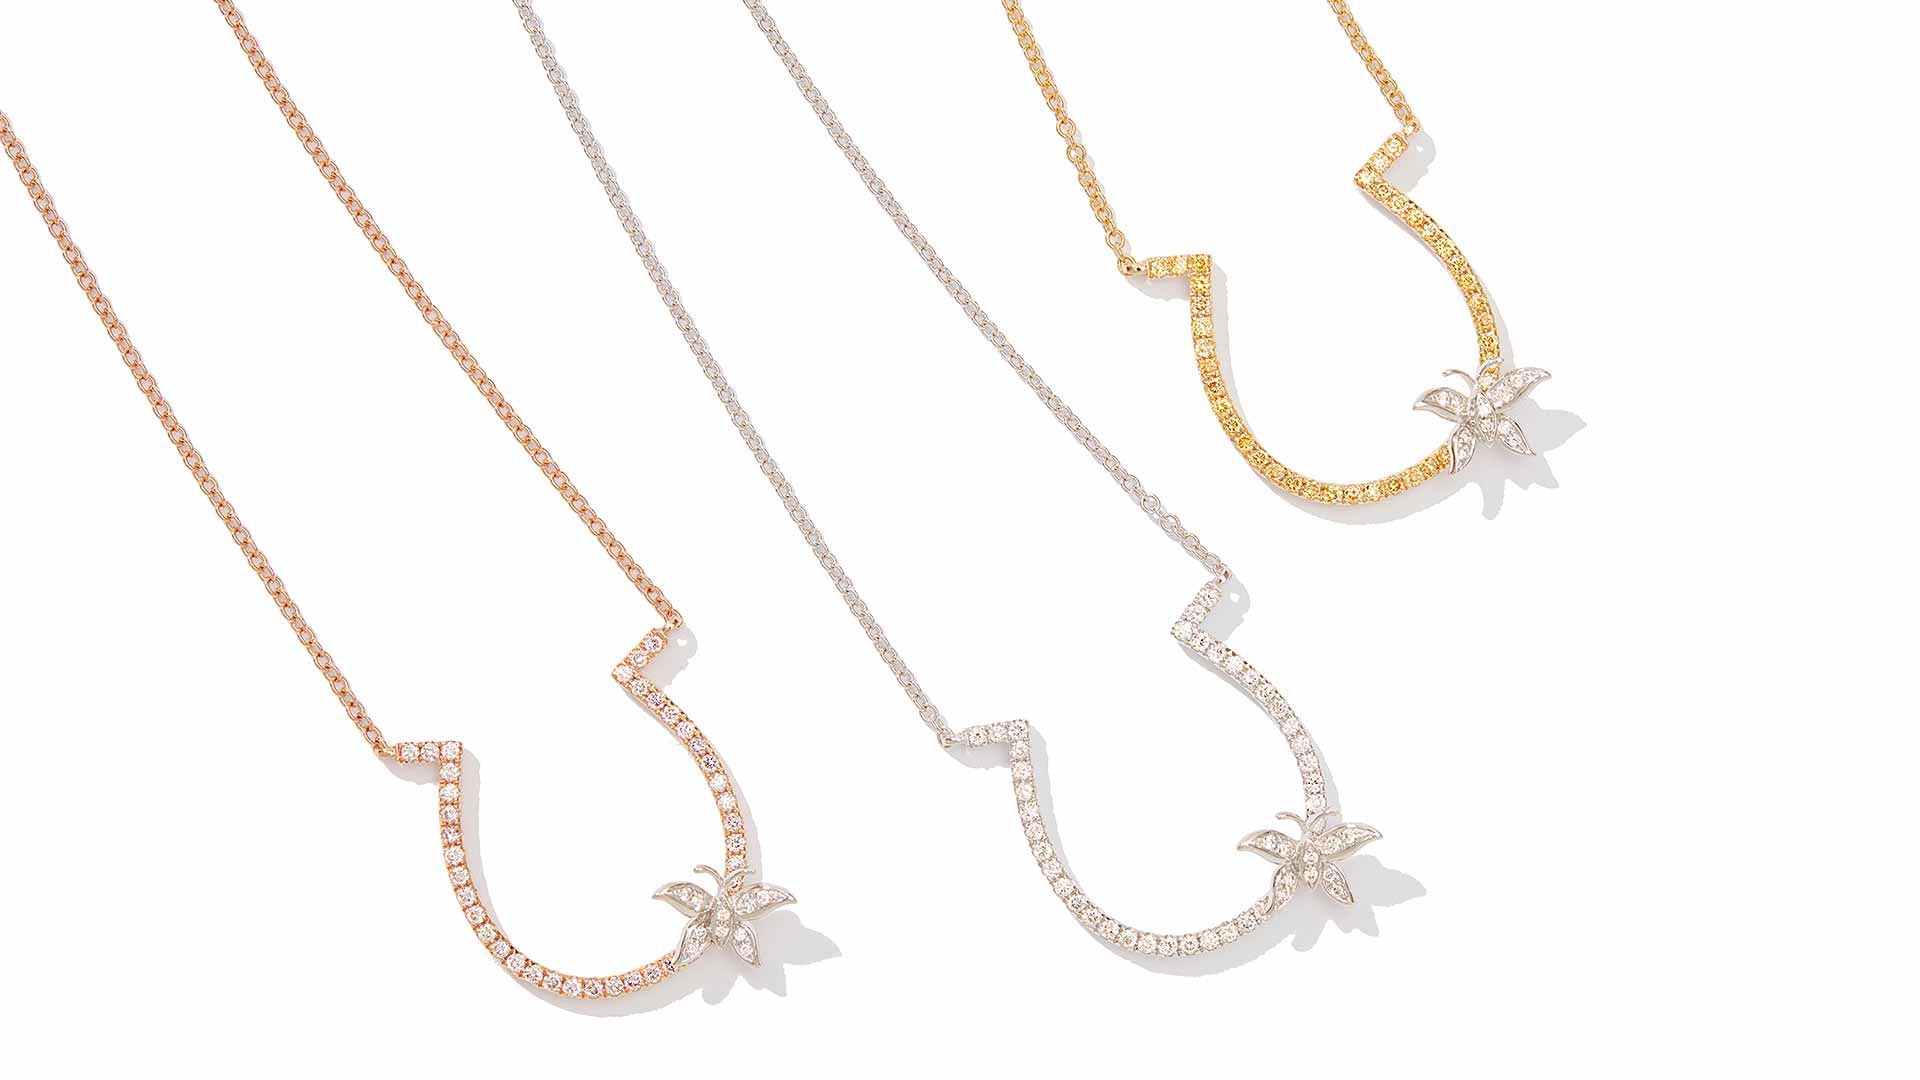 Gold diamond necklaces styled and photographed by fine jewelry photographer Kate Benson.